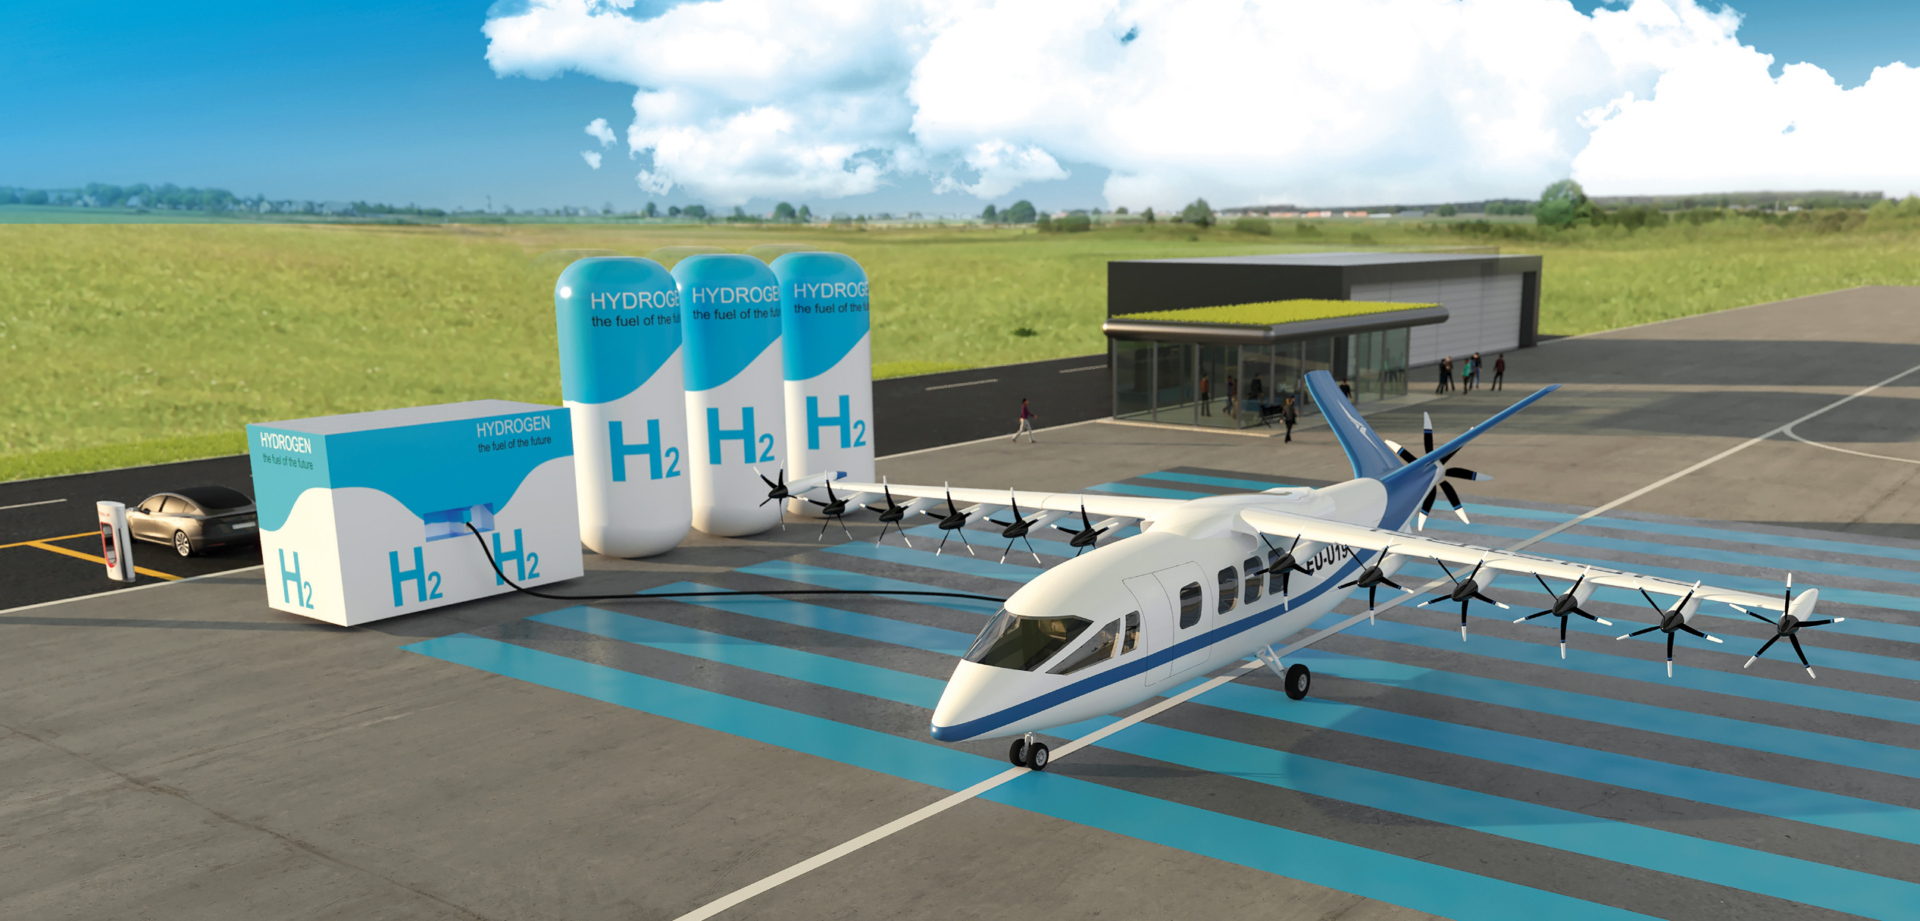 Clean aviation technologies: how investment is reaping rewards